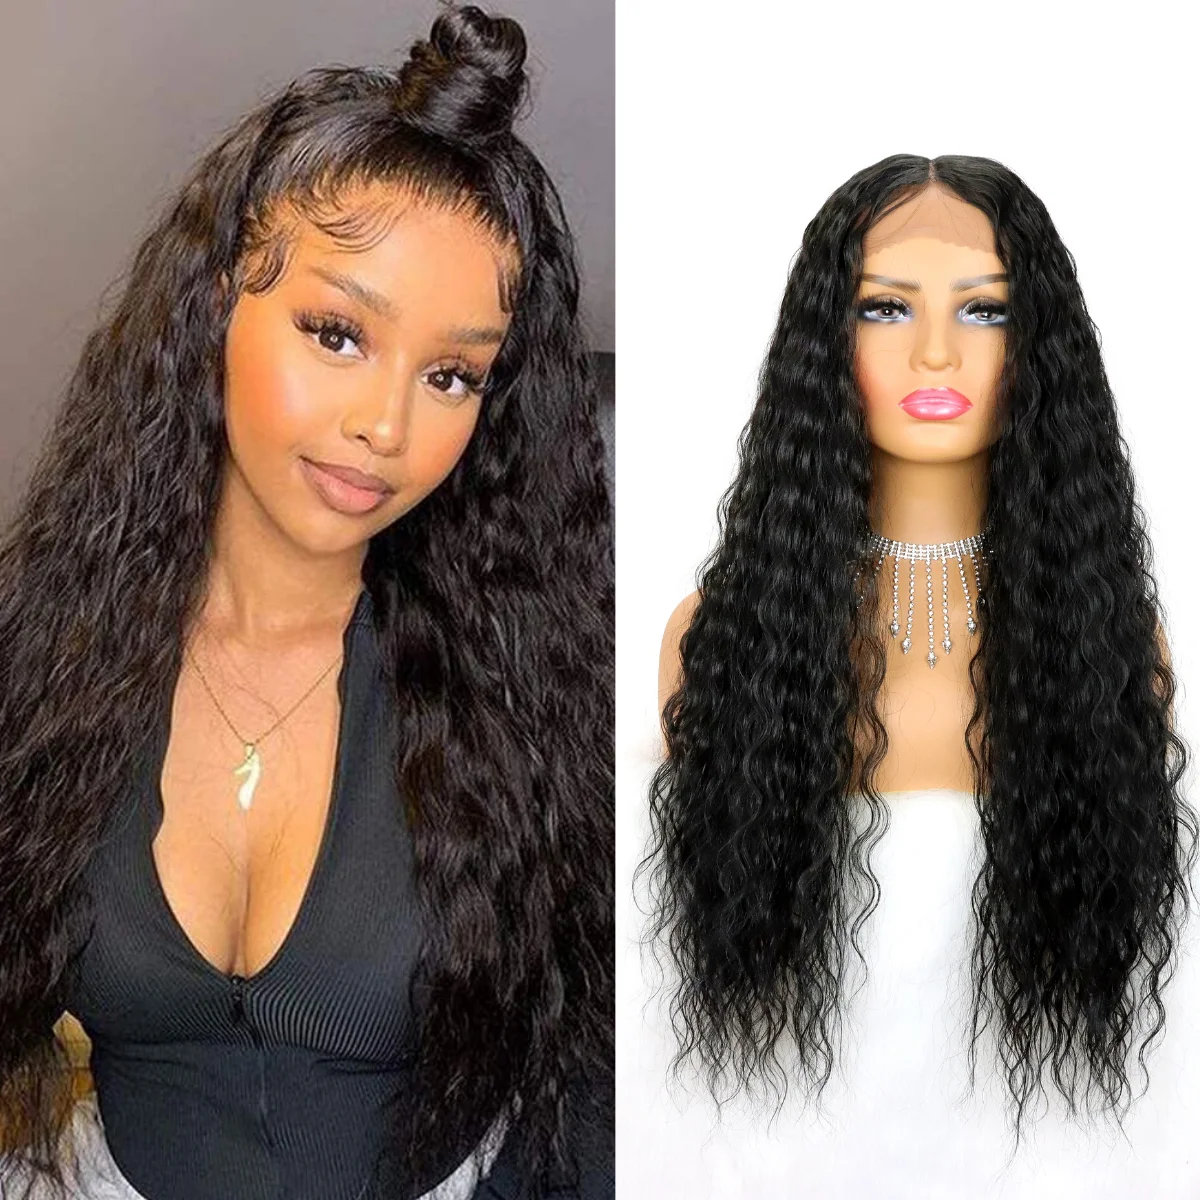 Curly Synthetic Wigs for Black Women  Lace  Long Loose Wave  Wig Heat Resistant Fiber Natural Looking Cosplay Party Daily Use